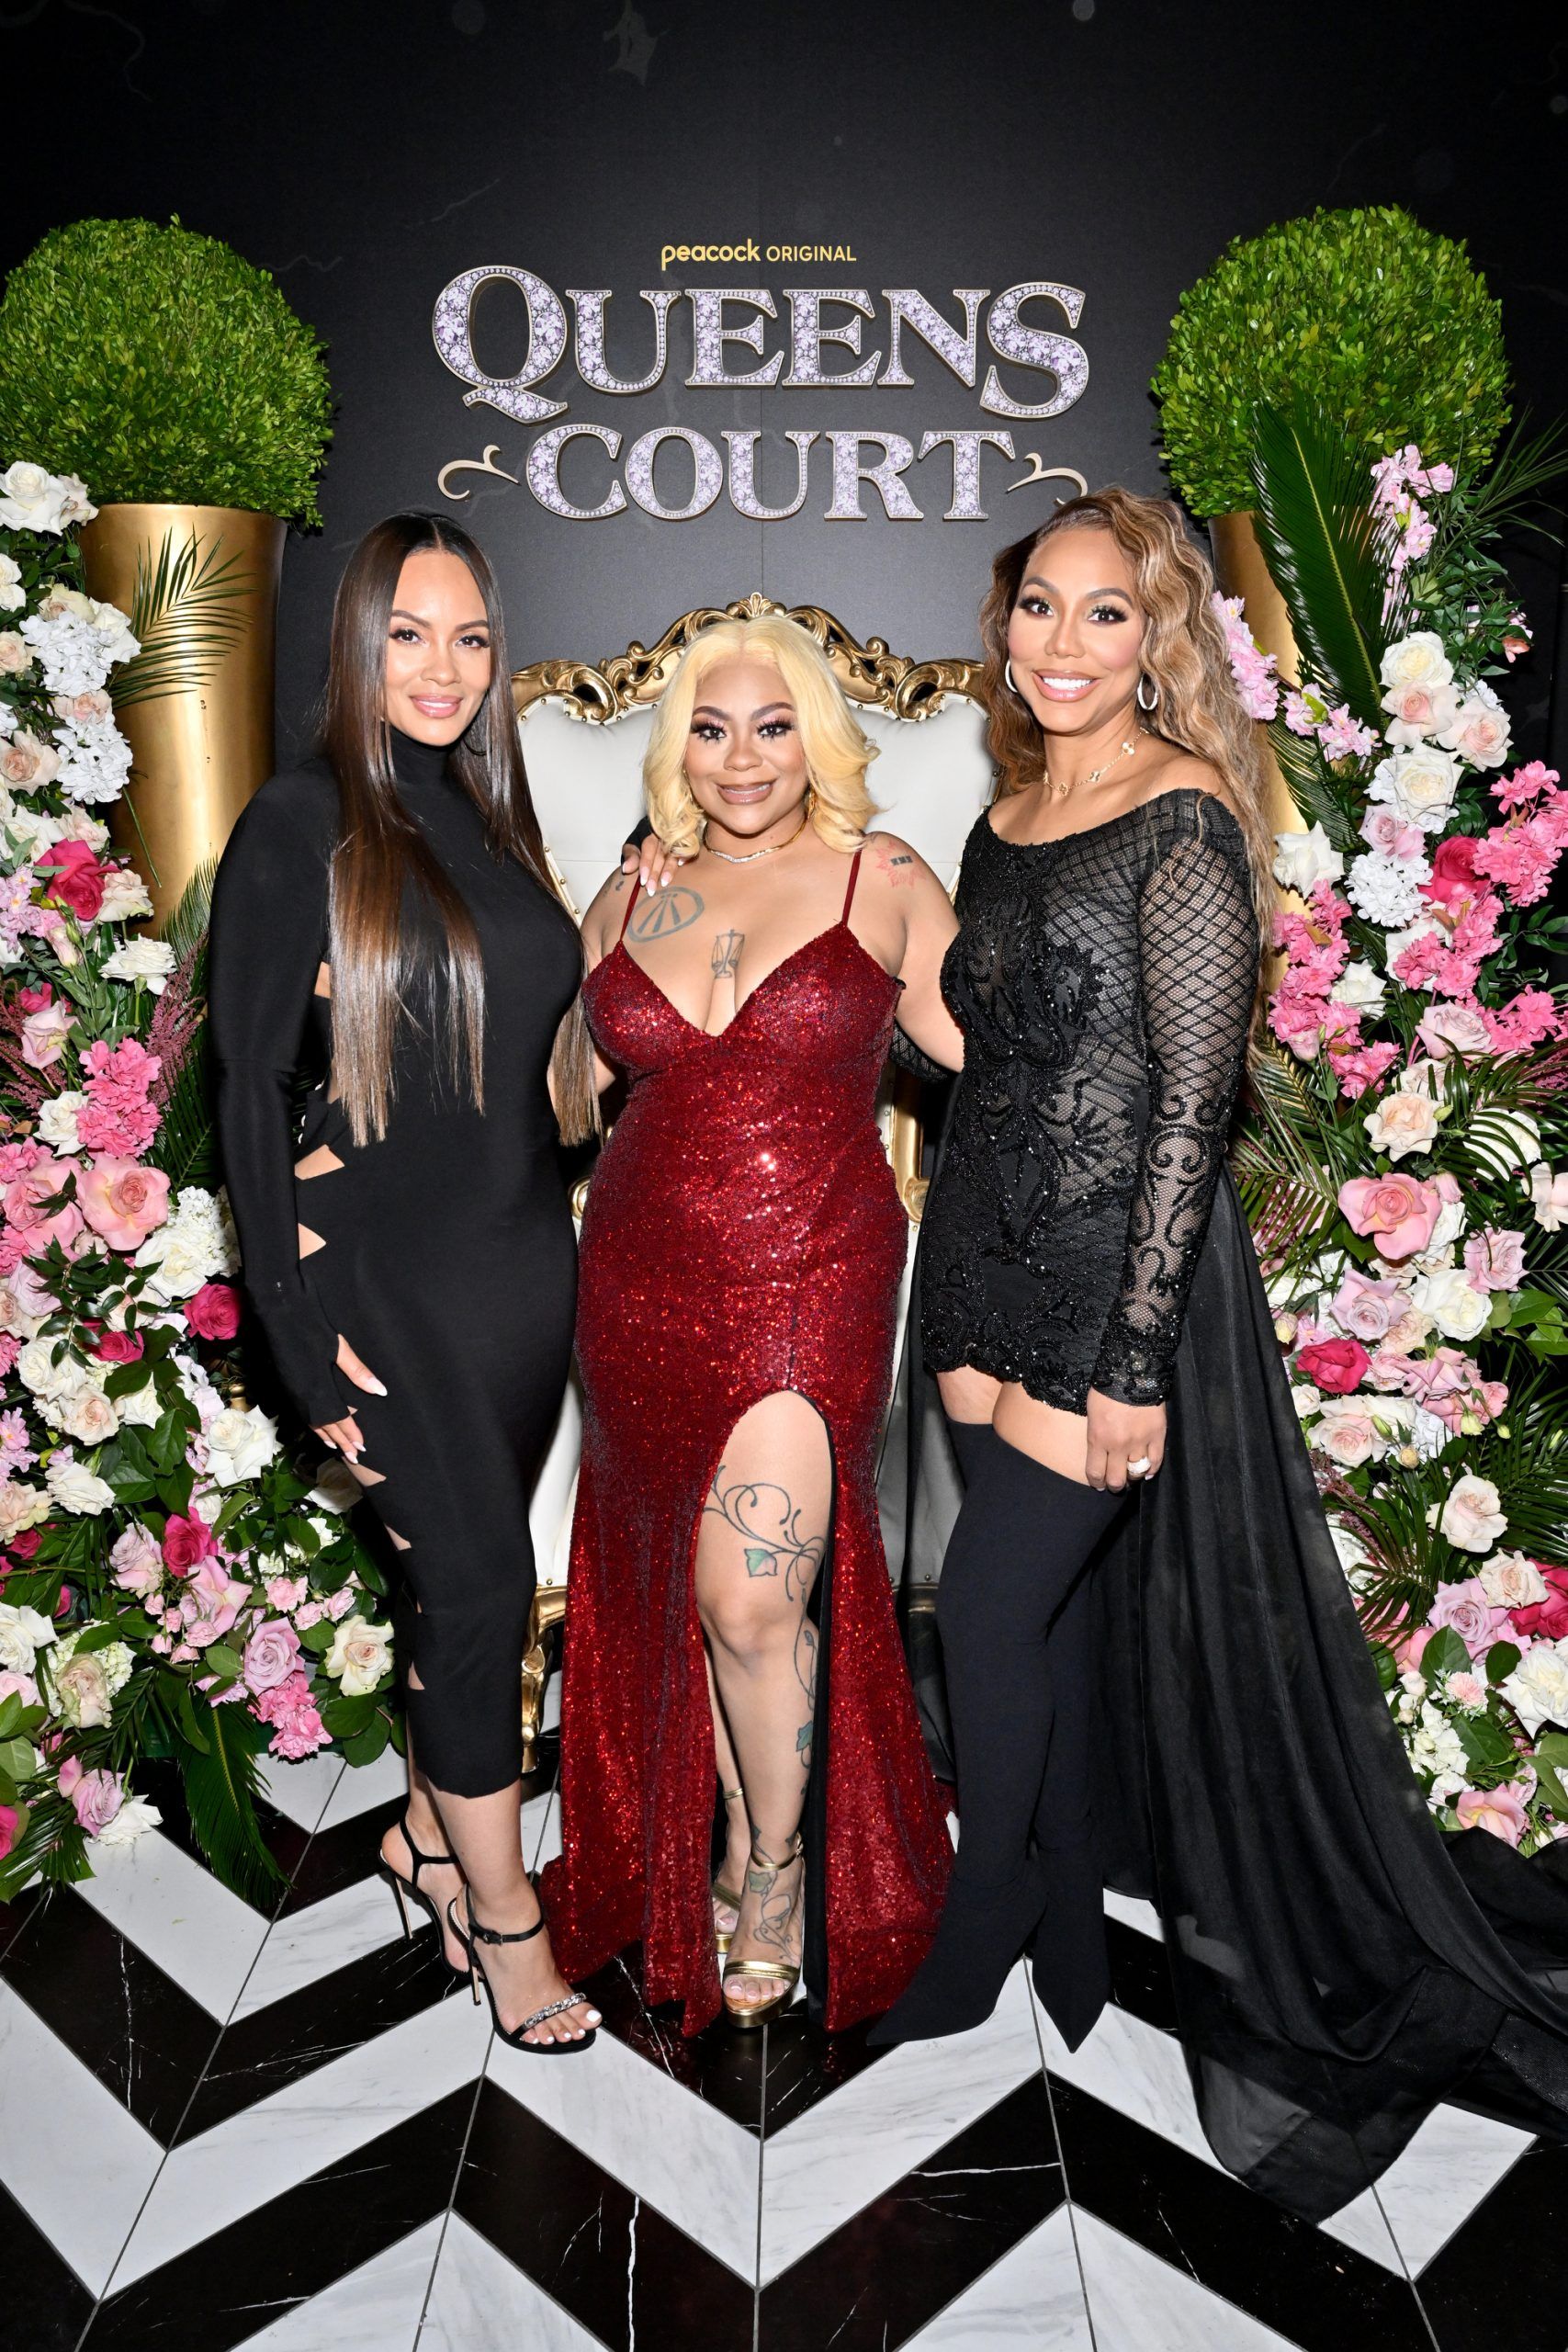 Peacock Celebrates The Series Debut Of ‘Queens Court’ In ATL